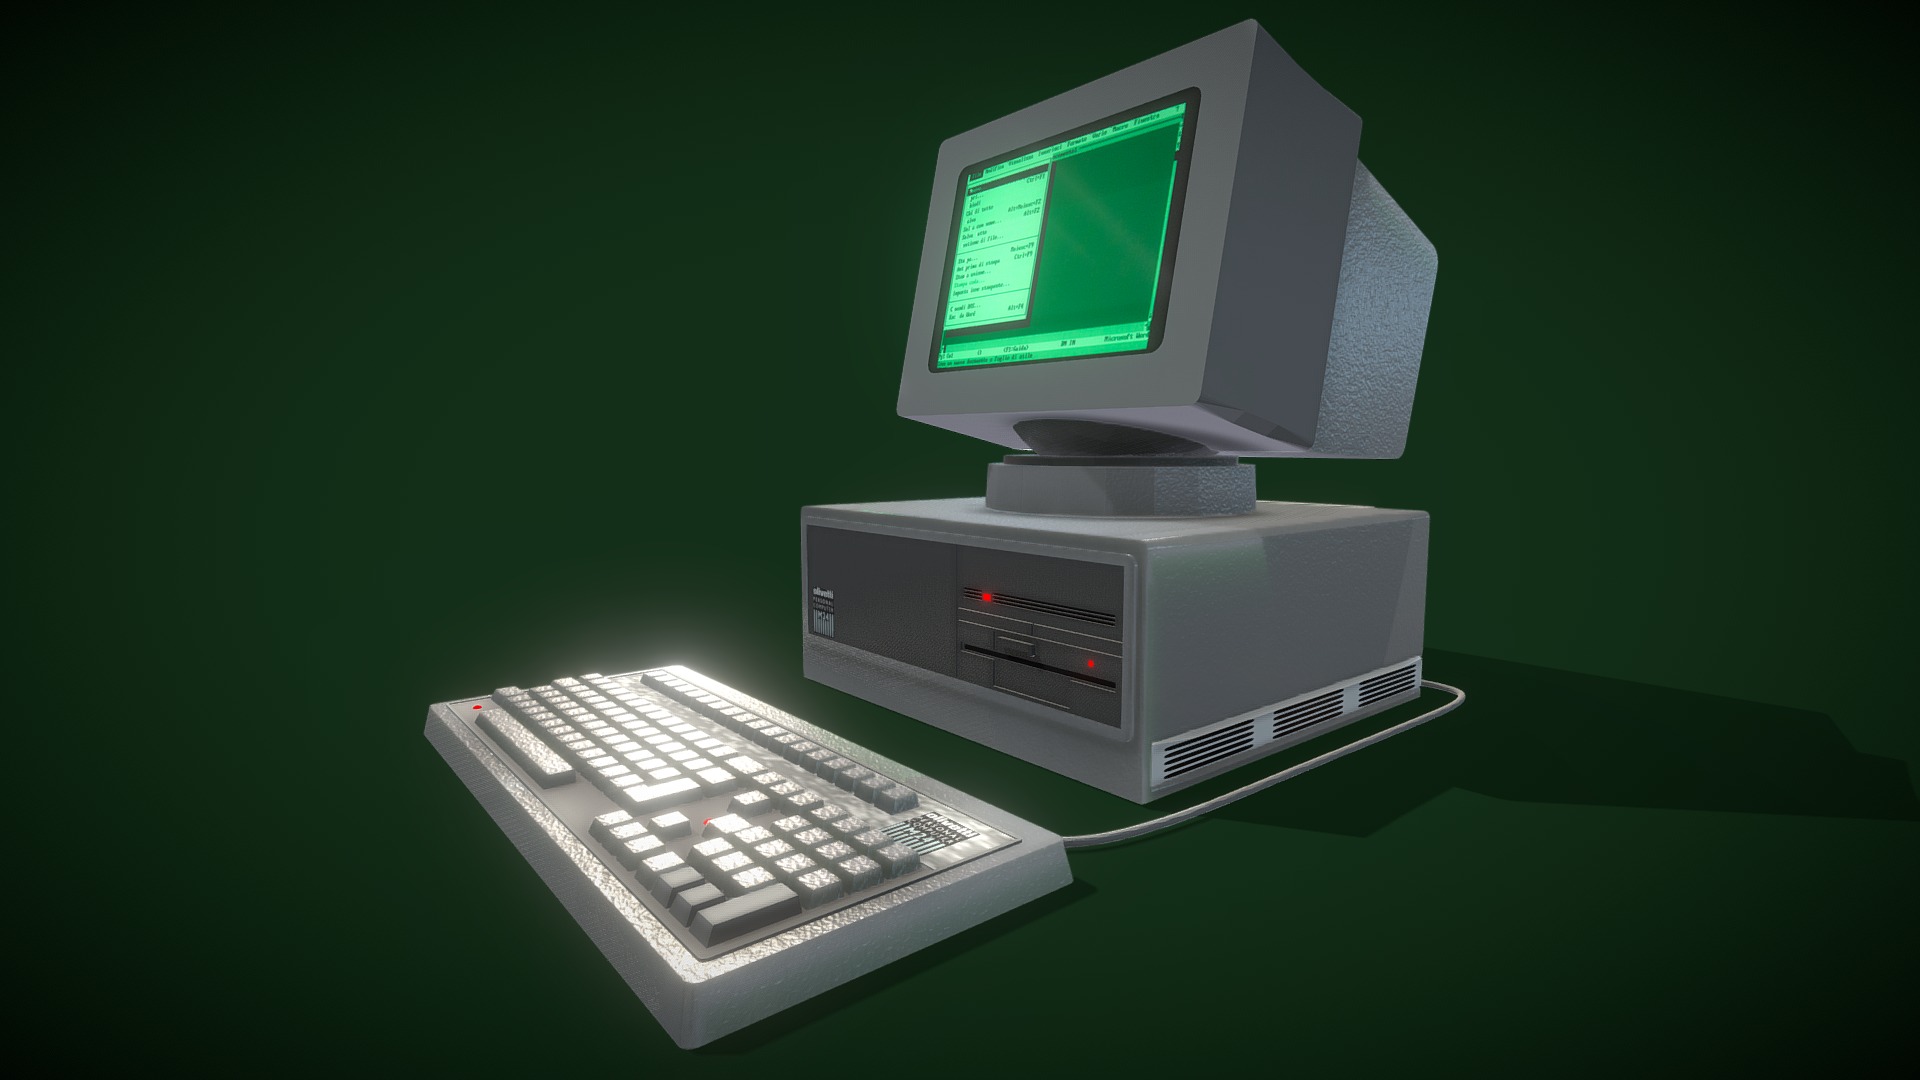 3D model Olivetti M24 – 1983 – Italy - This is a 3D model of the Olivetti M24 - 1983 - Italy. The 3D model is about a computer and a keyboard.